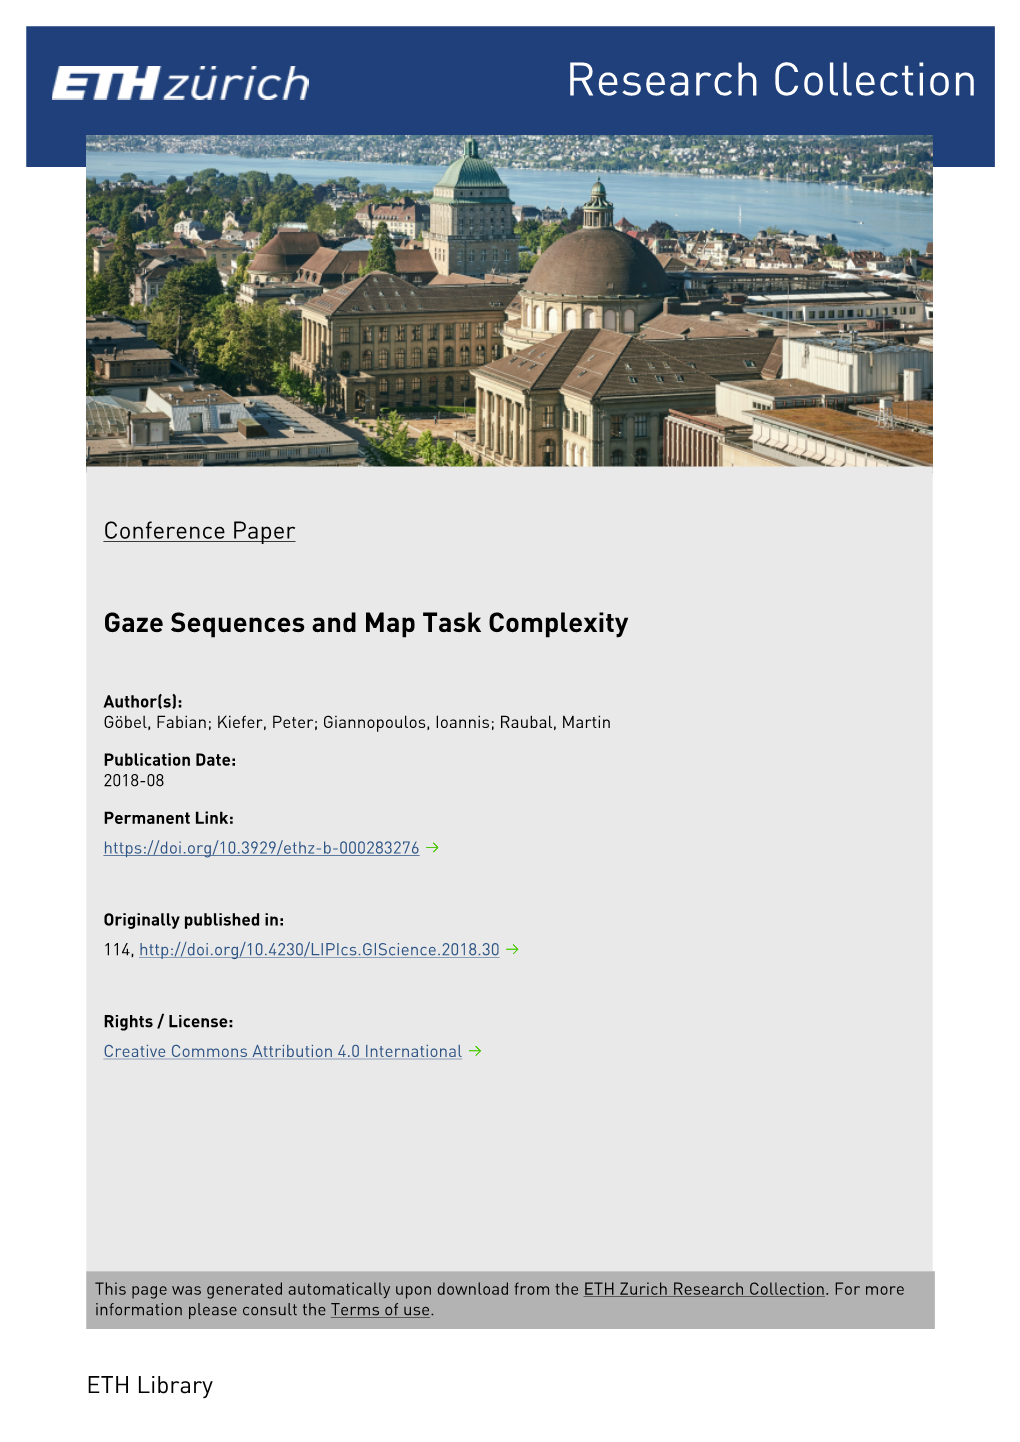 Gaze Sequences and Map Task Complexity